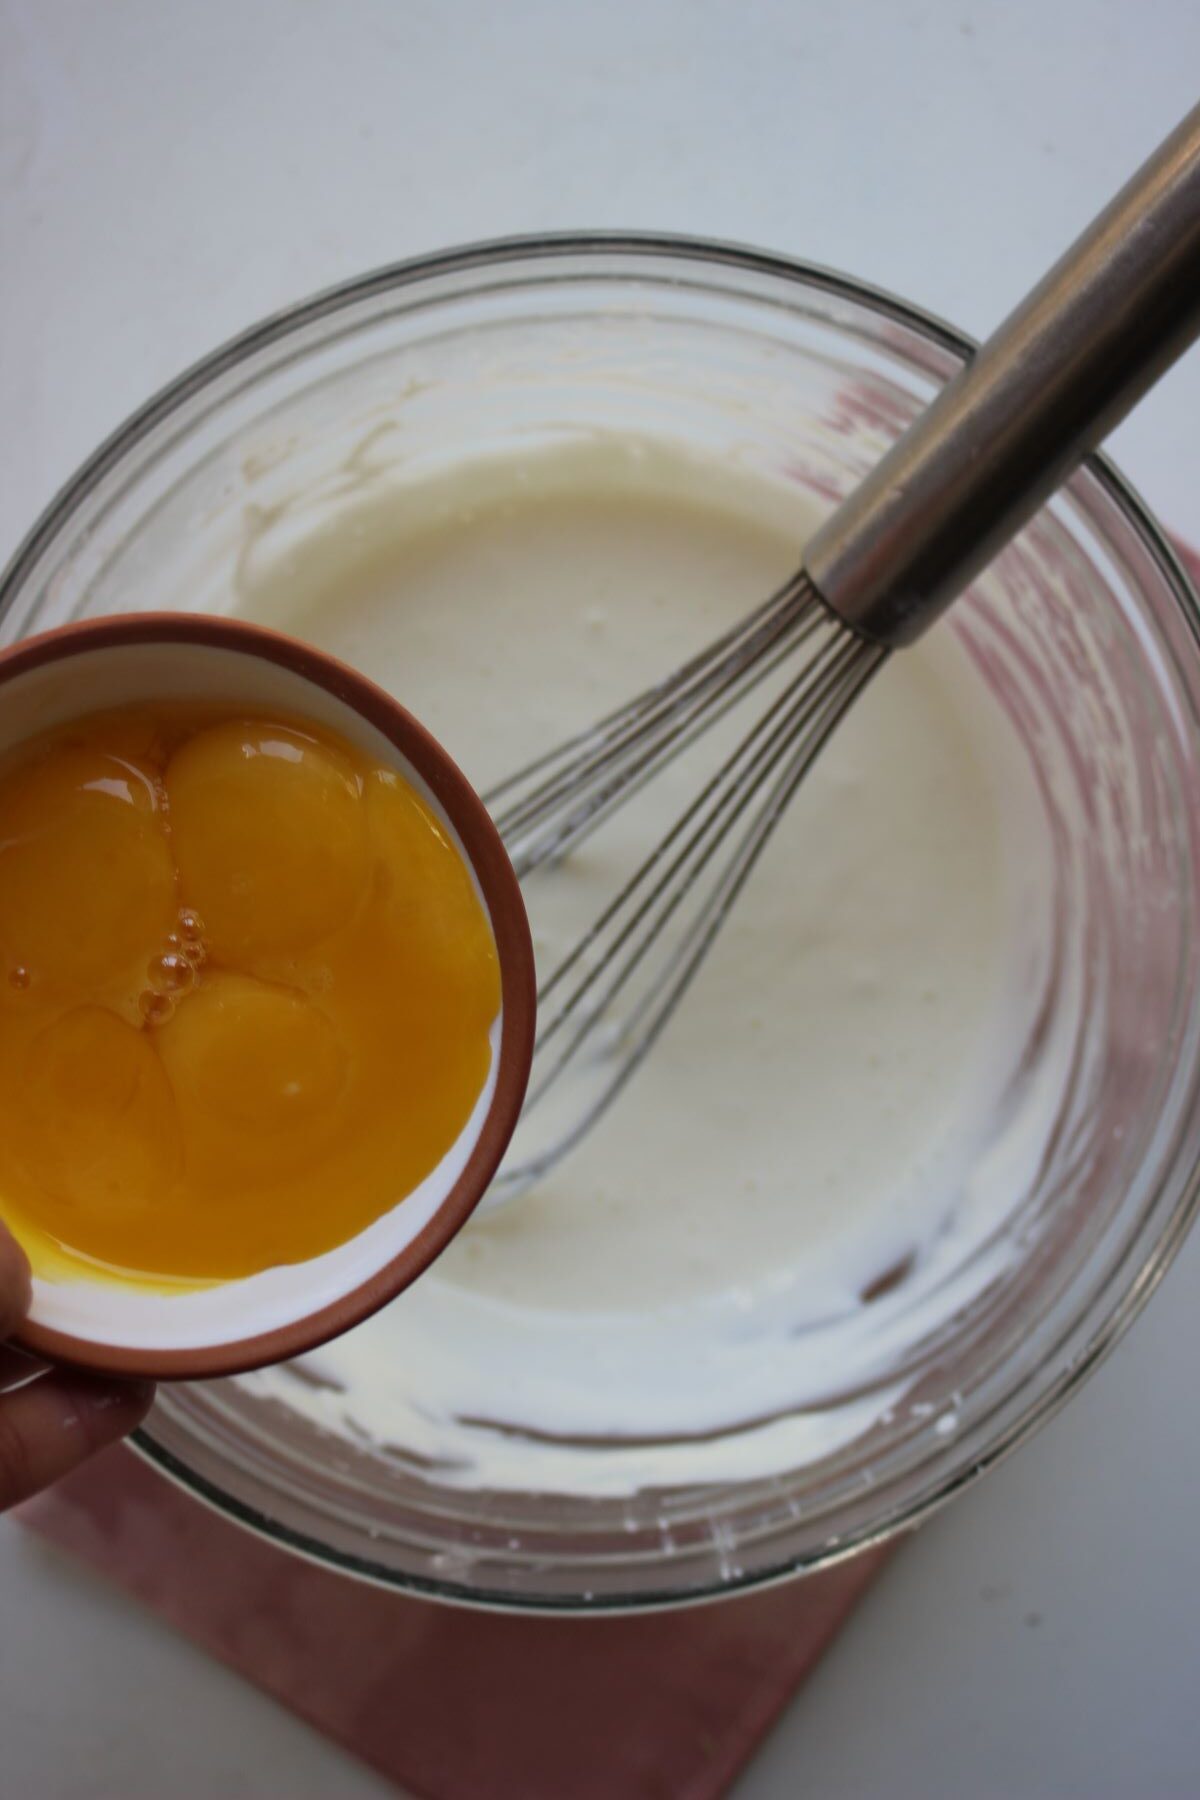 Plate with egg yolks is about to be poured into glass bowl with a white mixture.